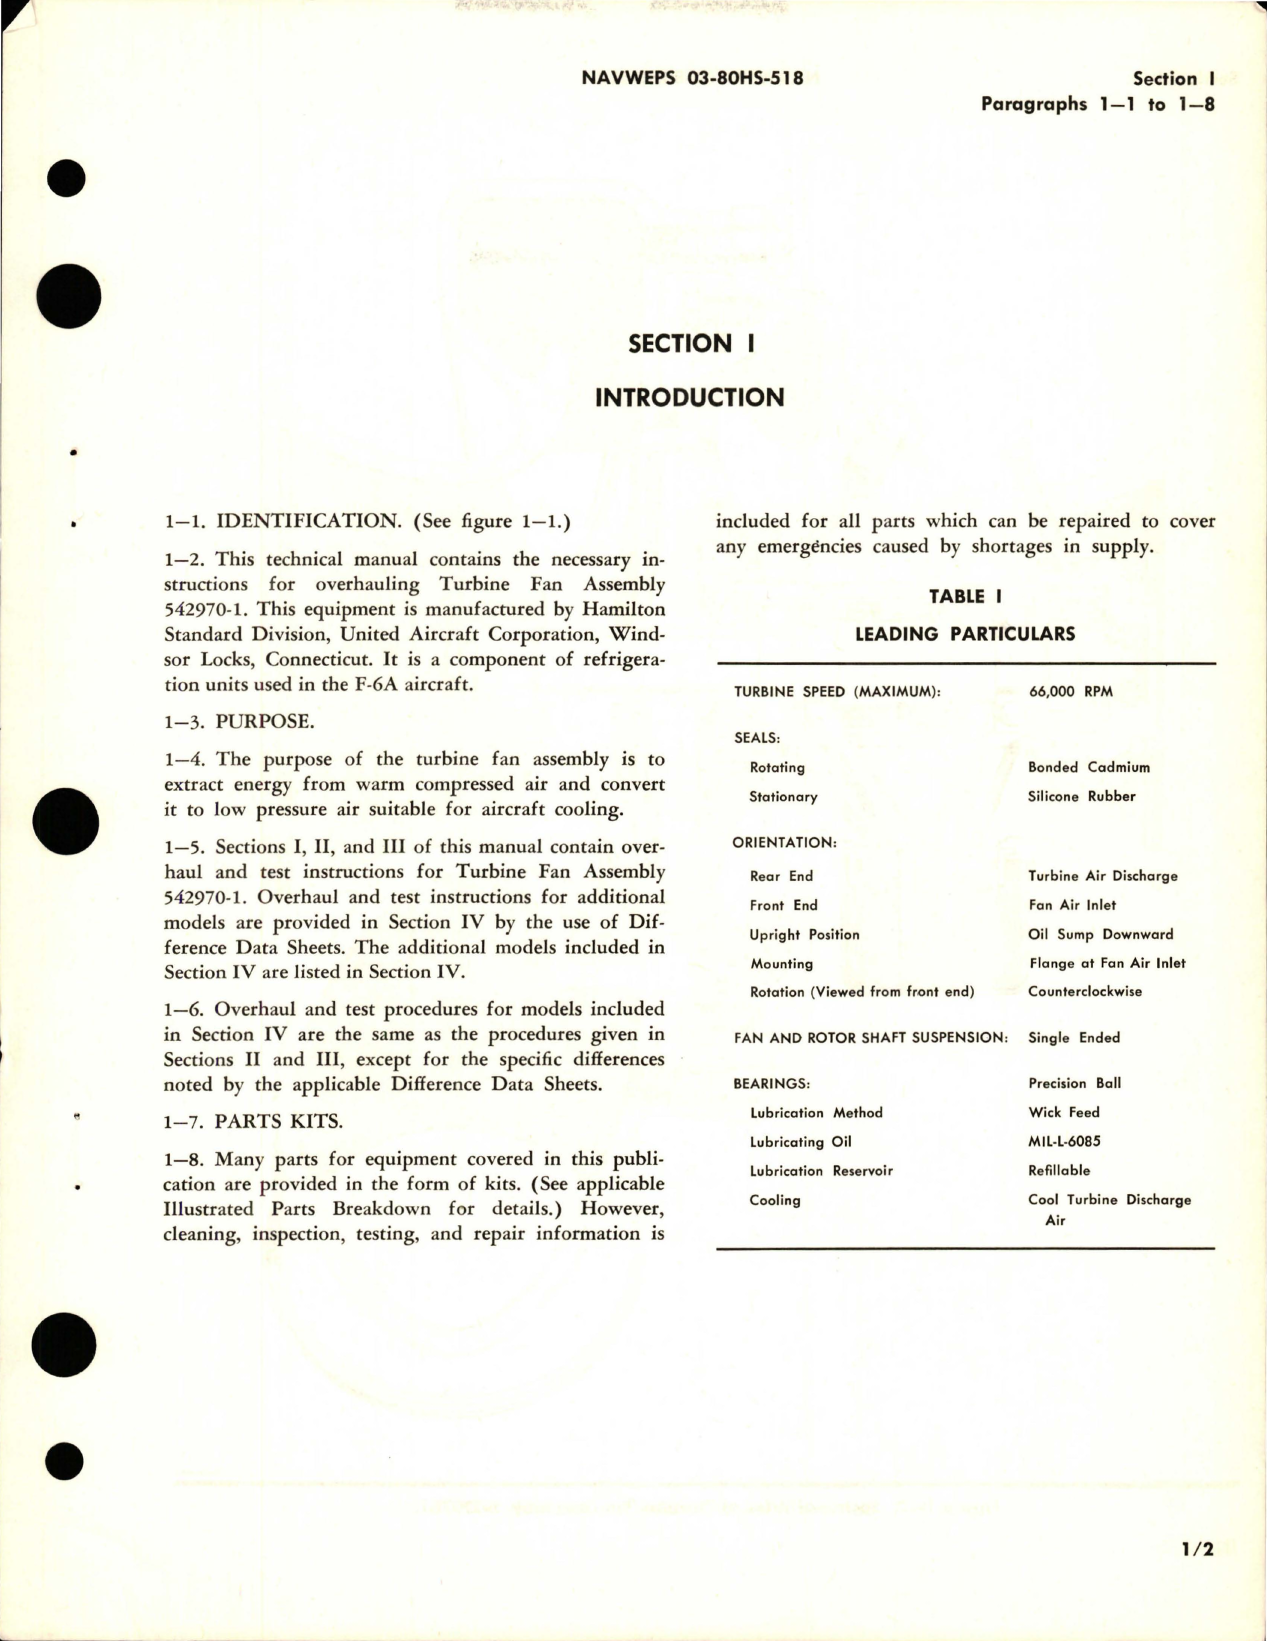 Sample page 5 from AirCorps Library document: Overhaul Instructions for Turbine Fan Assembly - 542970-1 and 542970-2